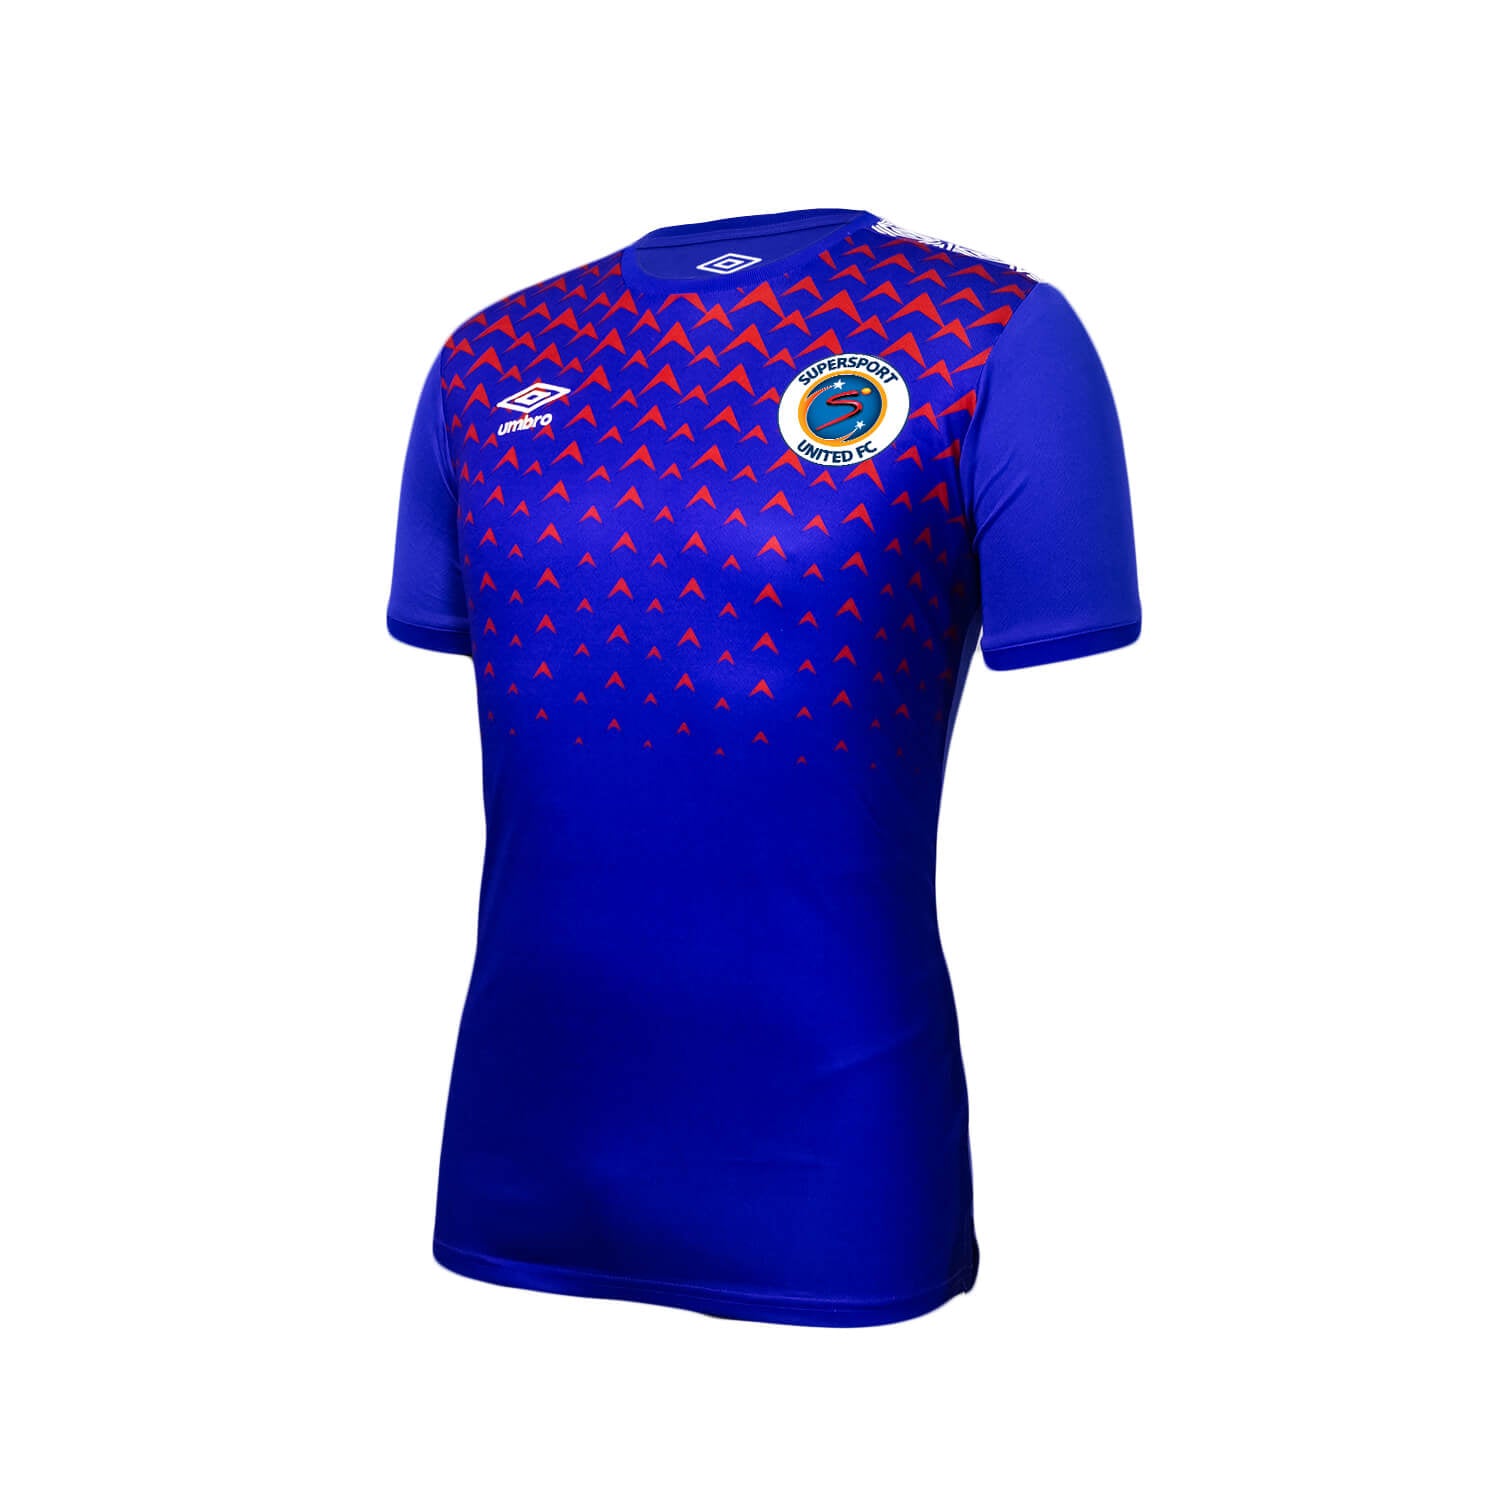 Supersport United Fc New Kit Cheap Online